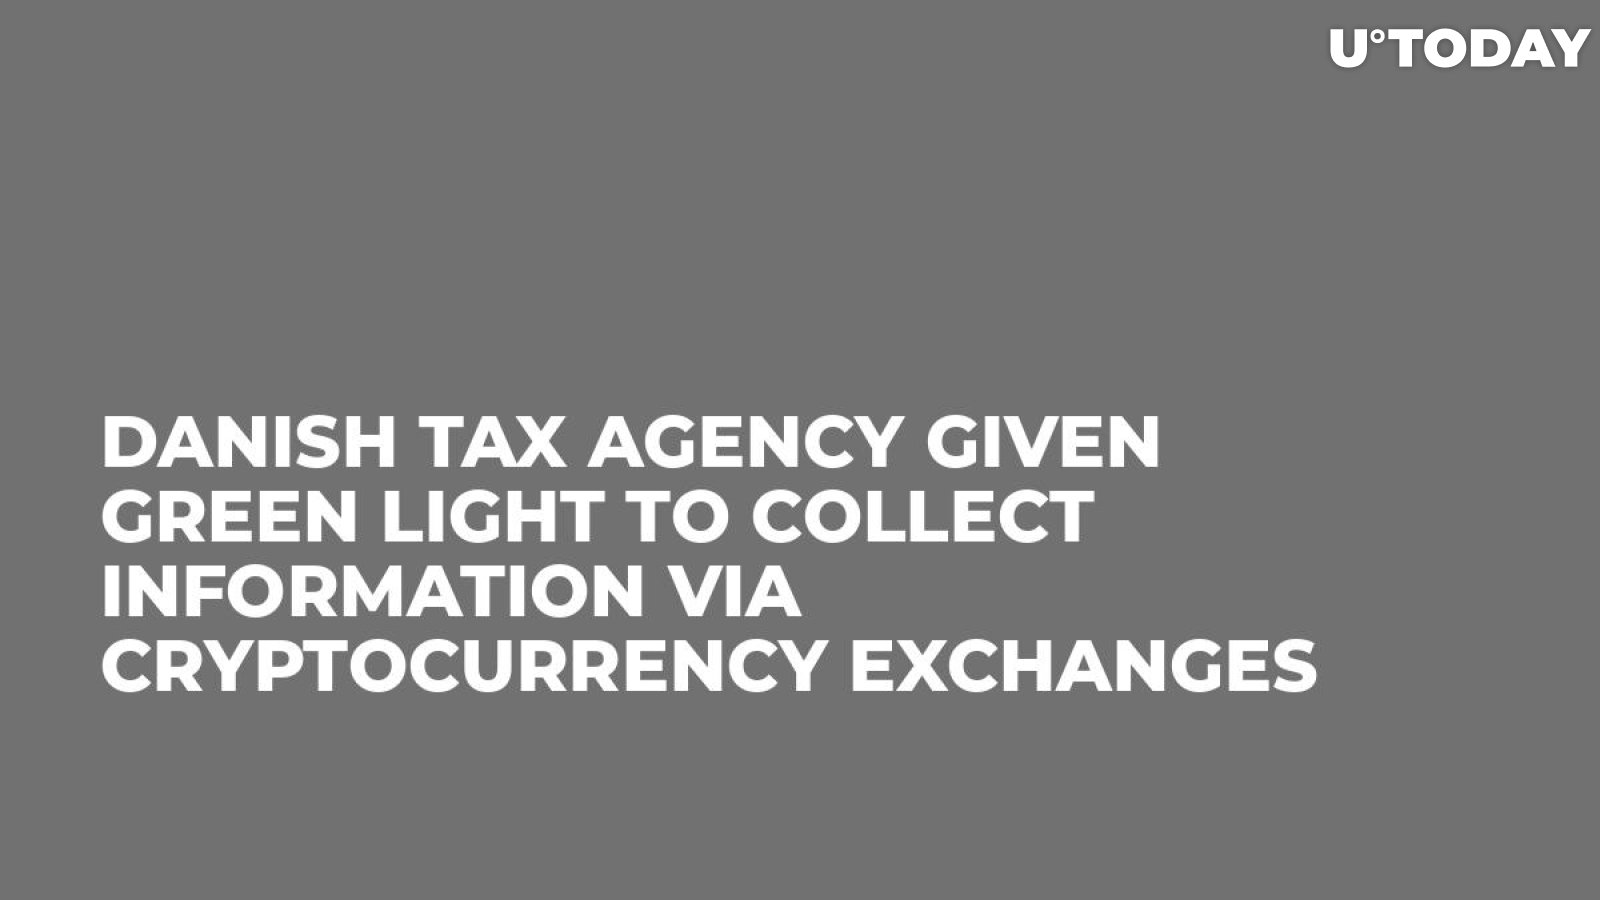 Danish Tax Agency Given Green Light to Collect Information Via Cryptocurrency Exchanges